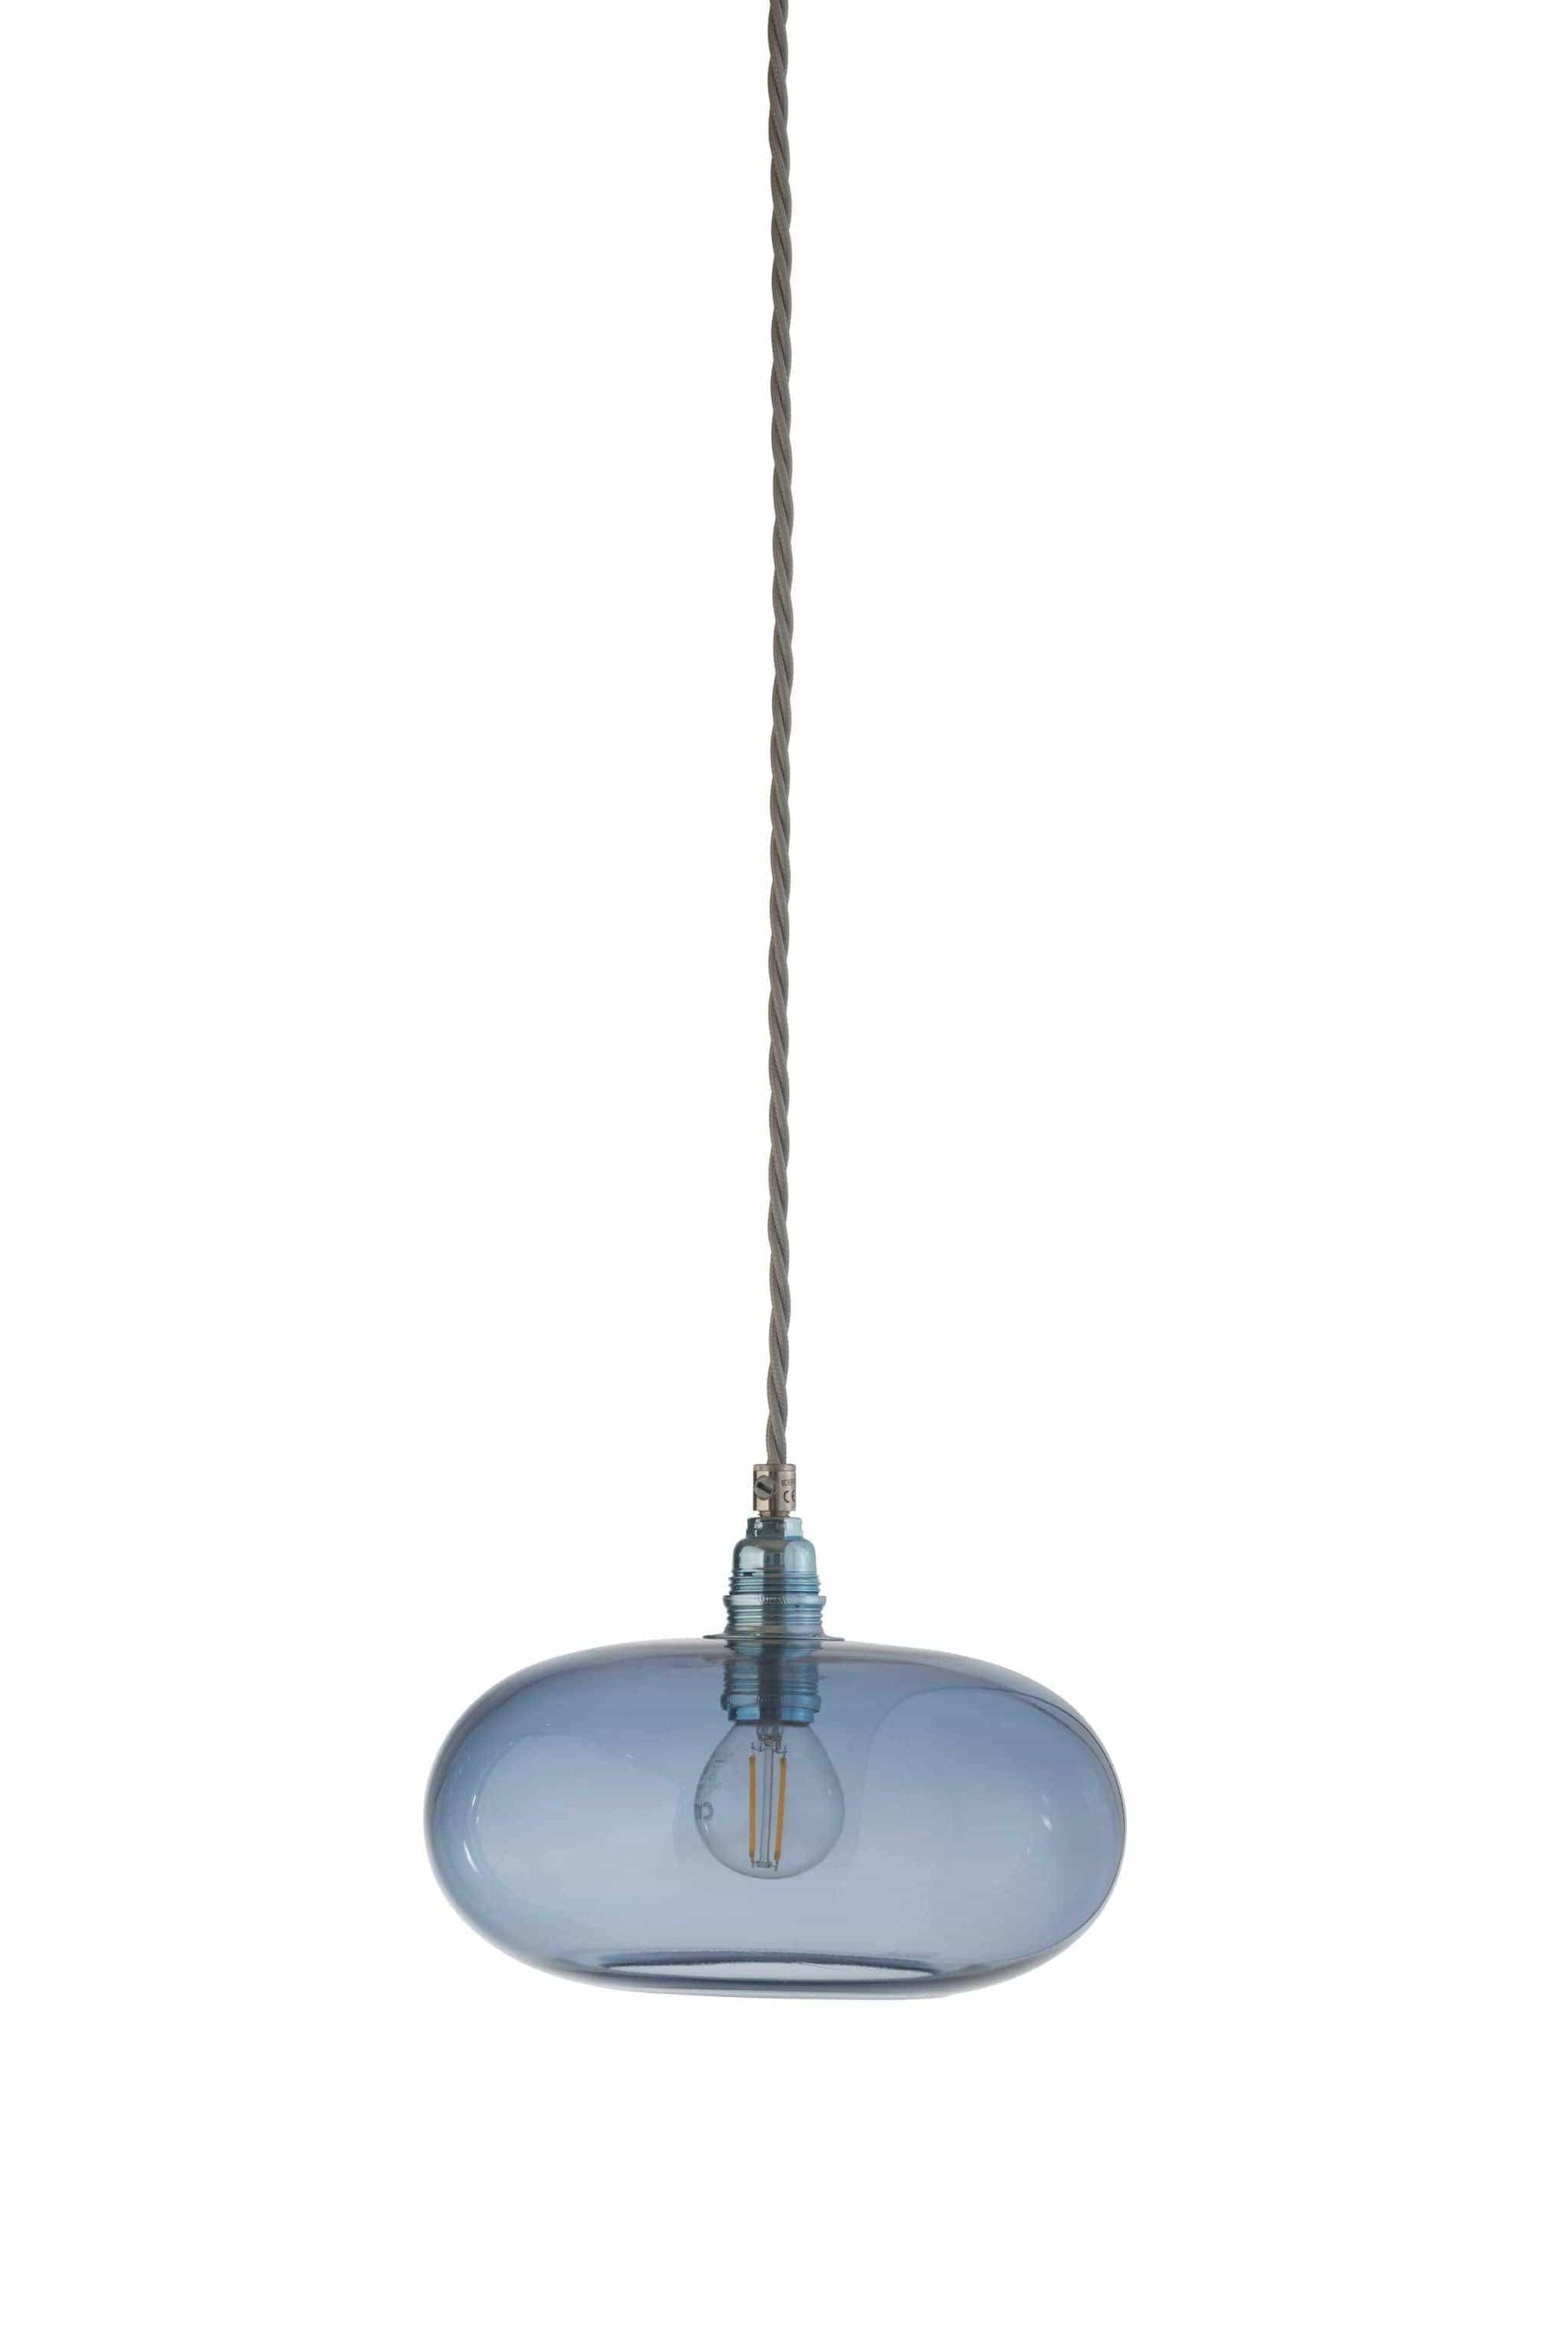 Ebb&Flow Pendant lights Deep blue with silver fittings Horizon Mouth-Blown Glass Pendant Light, small